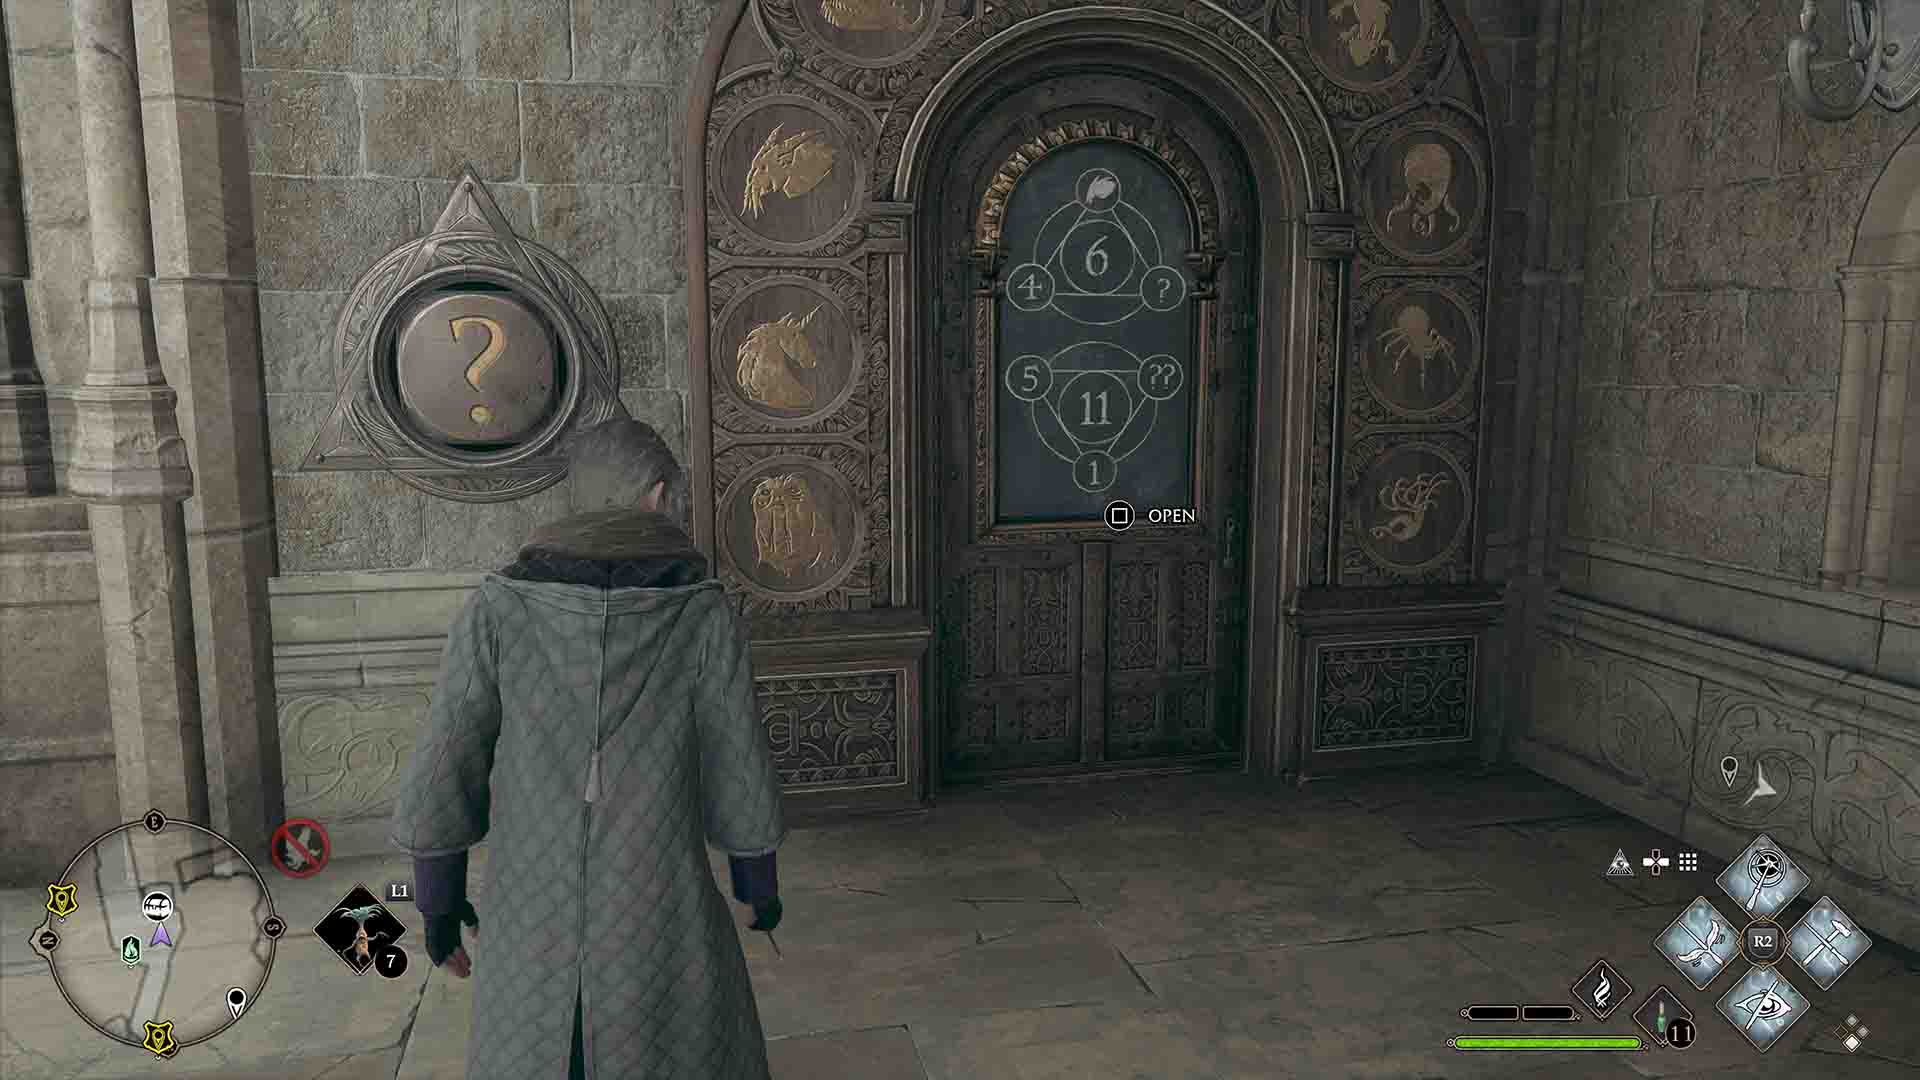 Hogwarts Legacy puzzle doors  How to solve the symbol and number